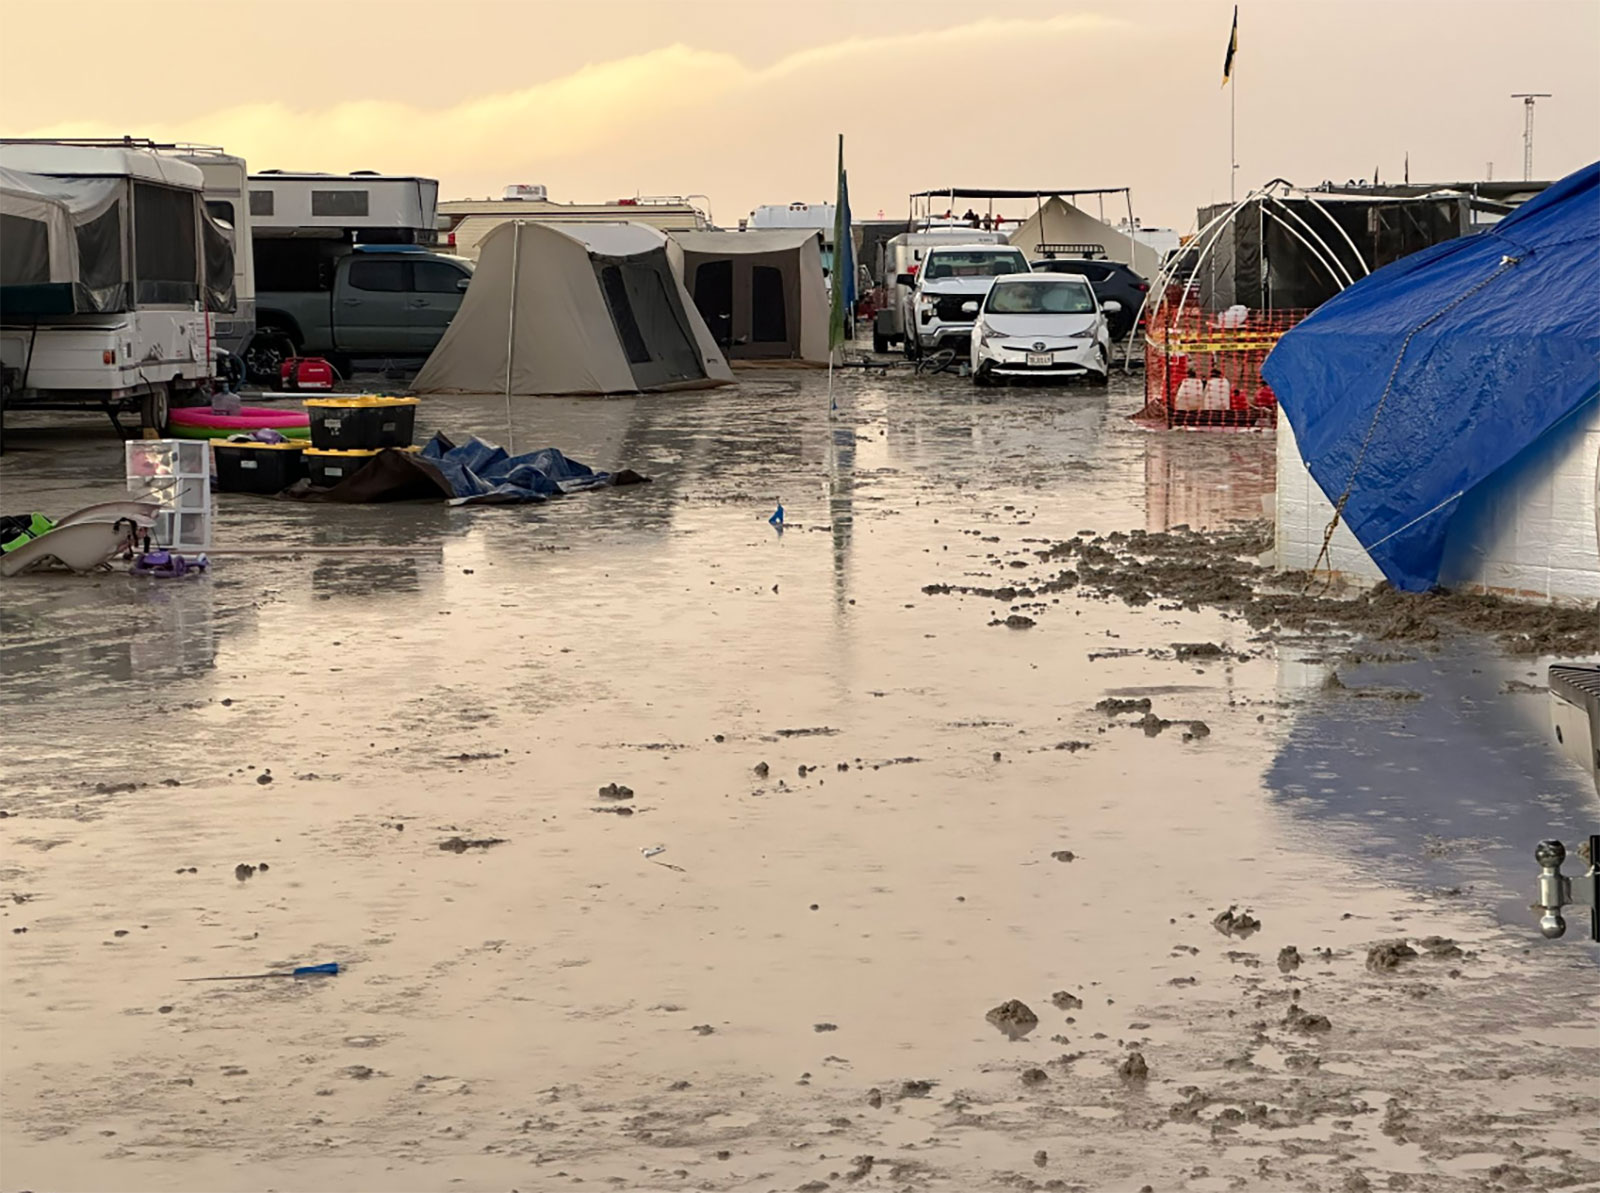 Muddy campgrounds are seen at Burning Man festival on Saturday. 